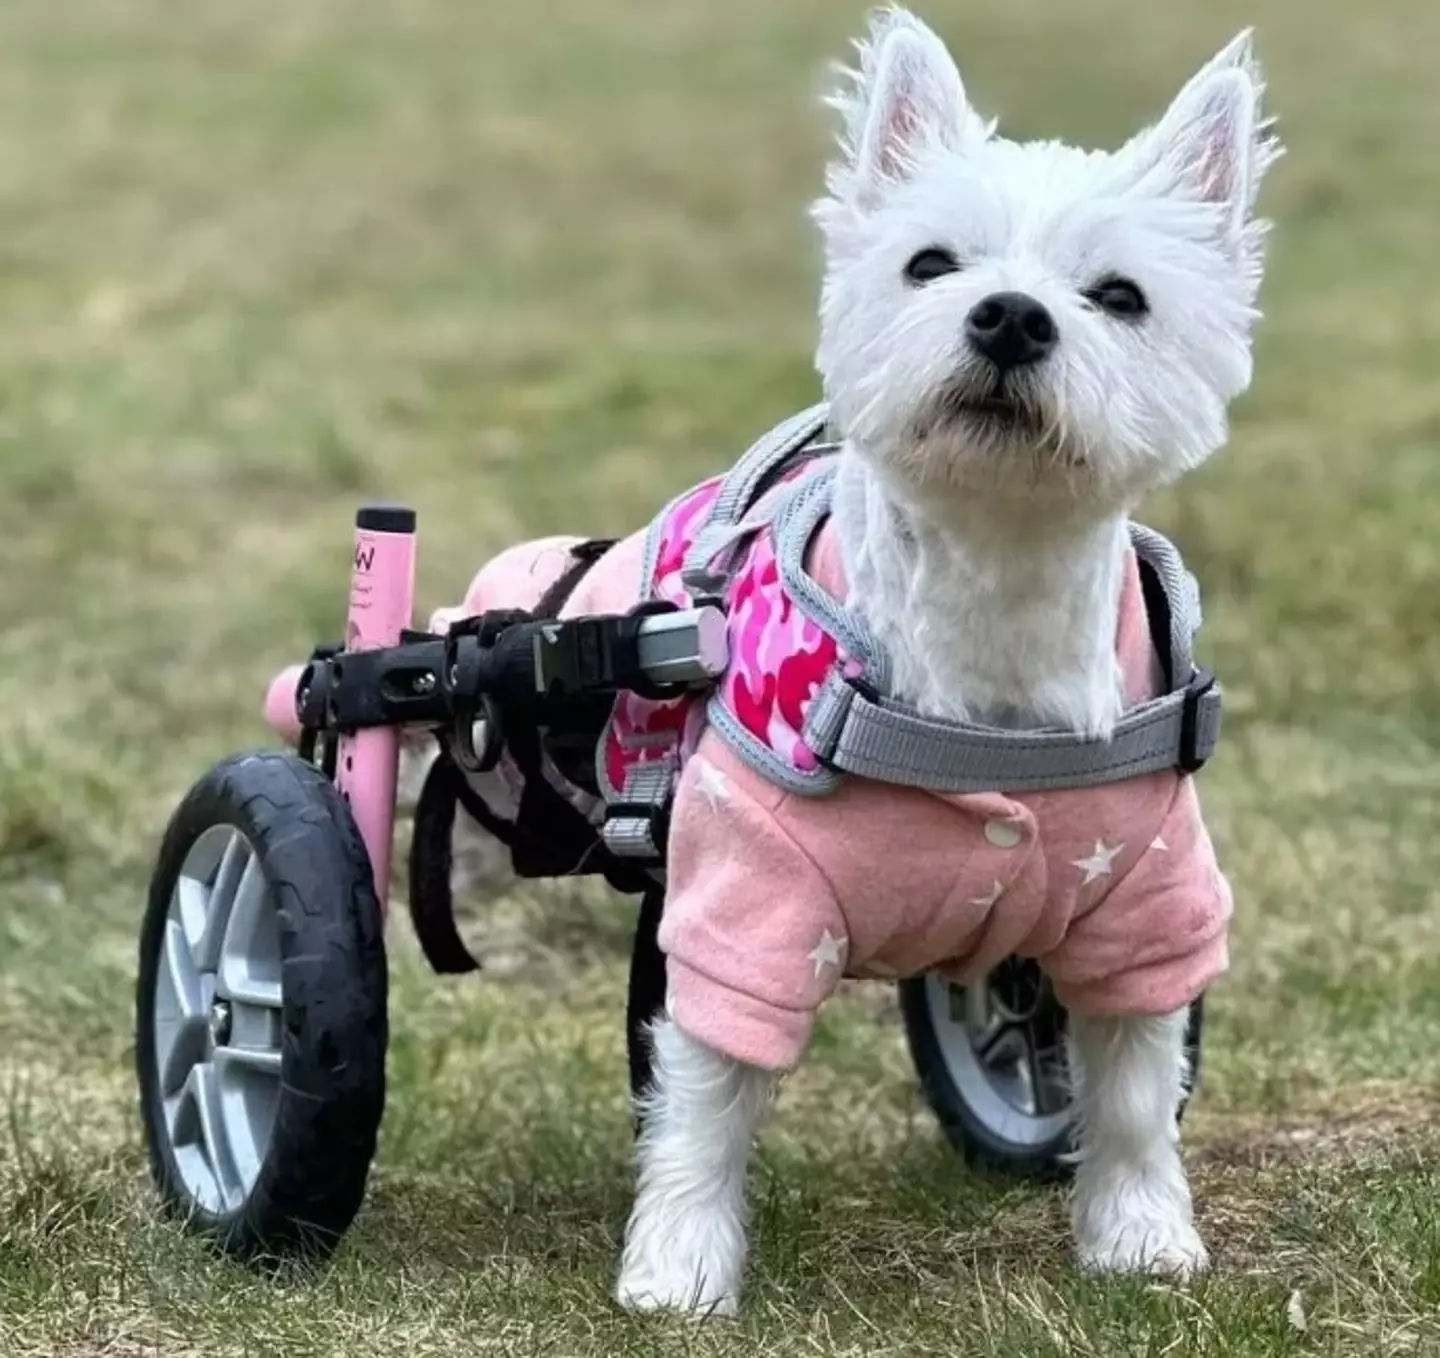 Tammy won a holiday for her work helping disabled animals, but she's not allowed to bring her dog. (Instagram/@pumpkinonwheels_pumpkinpower)